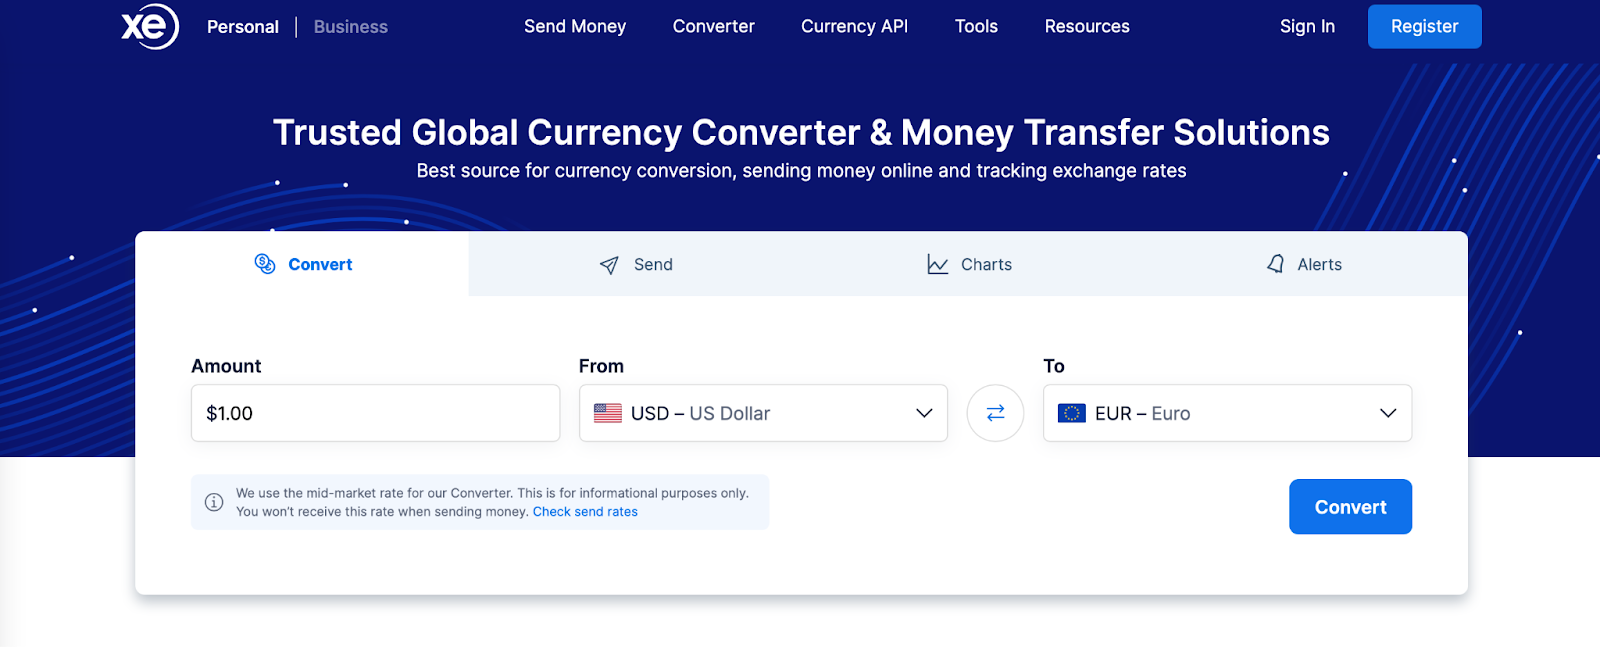 All you need to know about XE Money Transfer | Blog